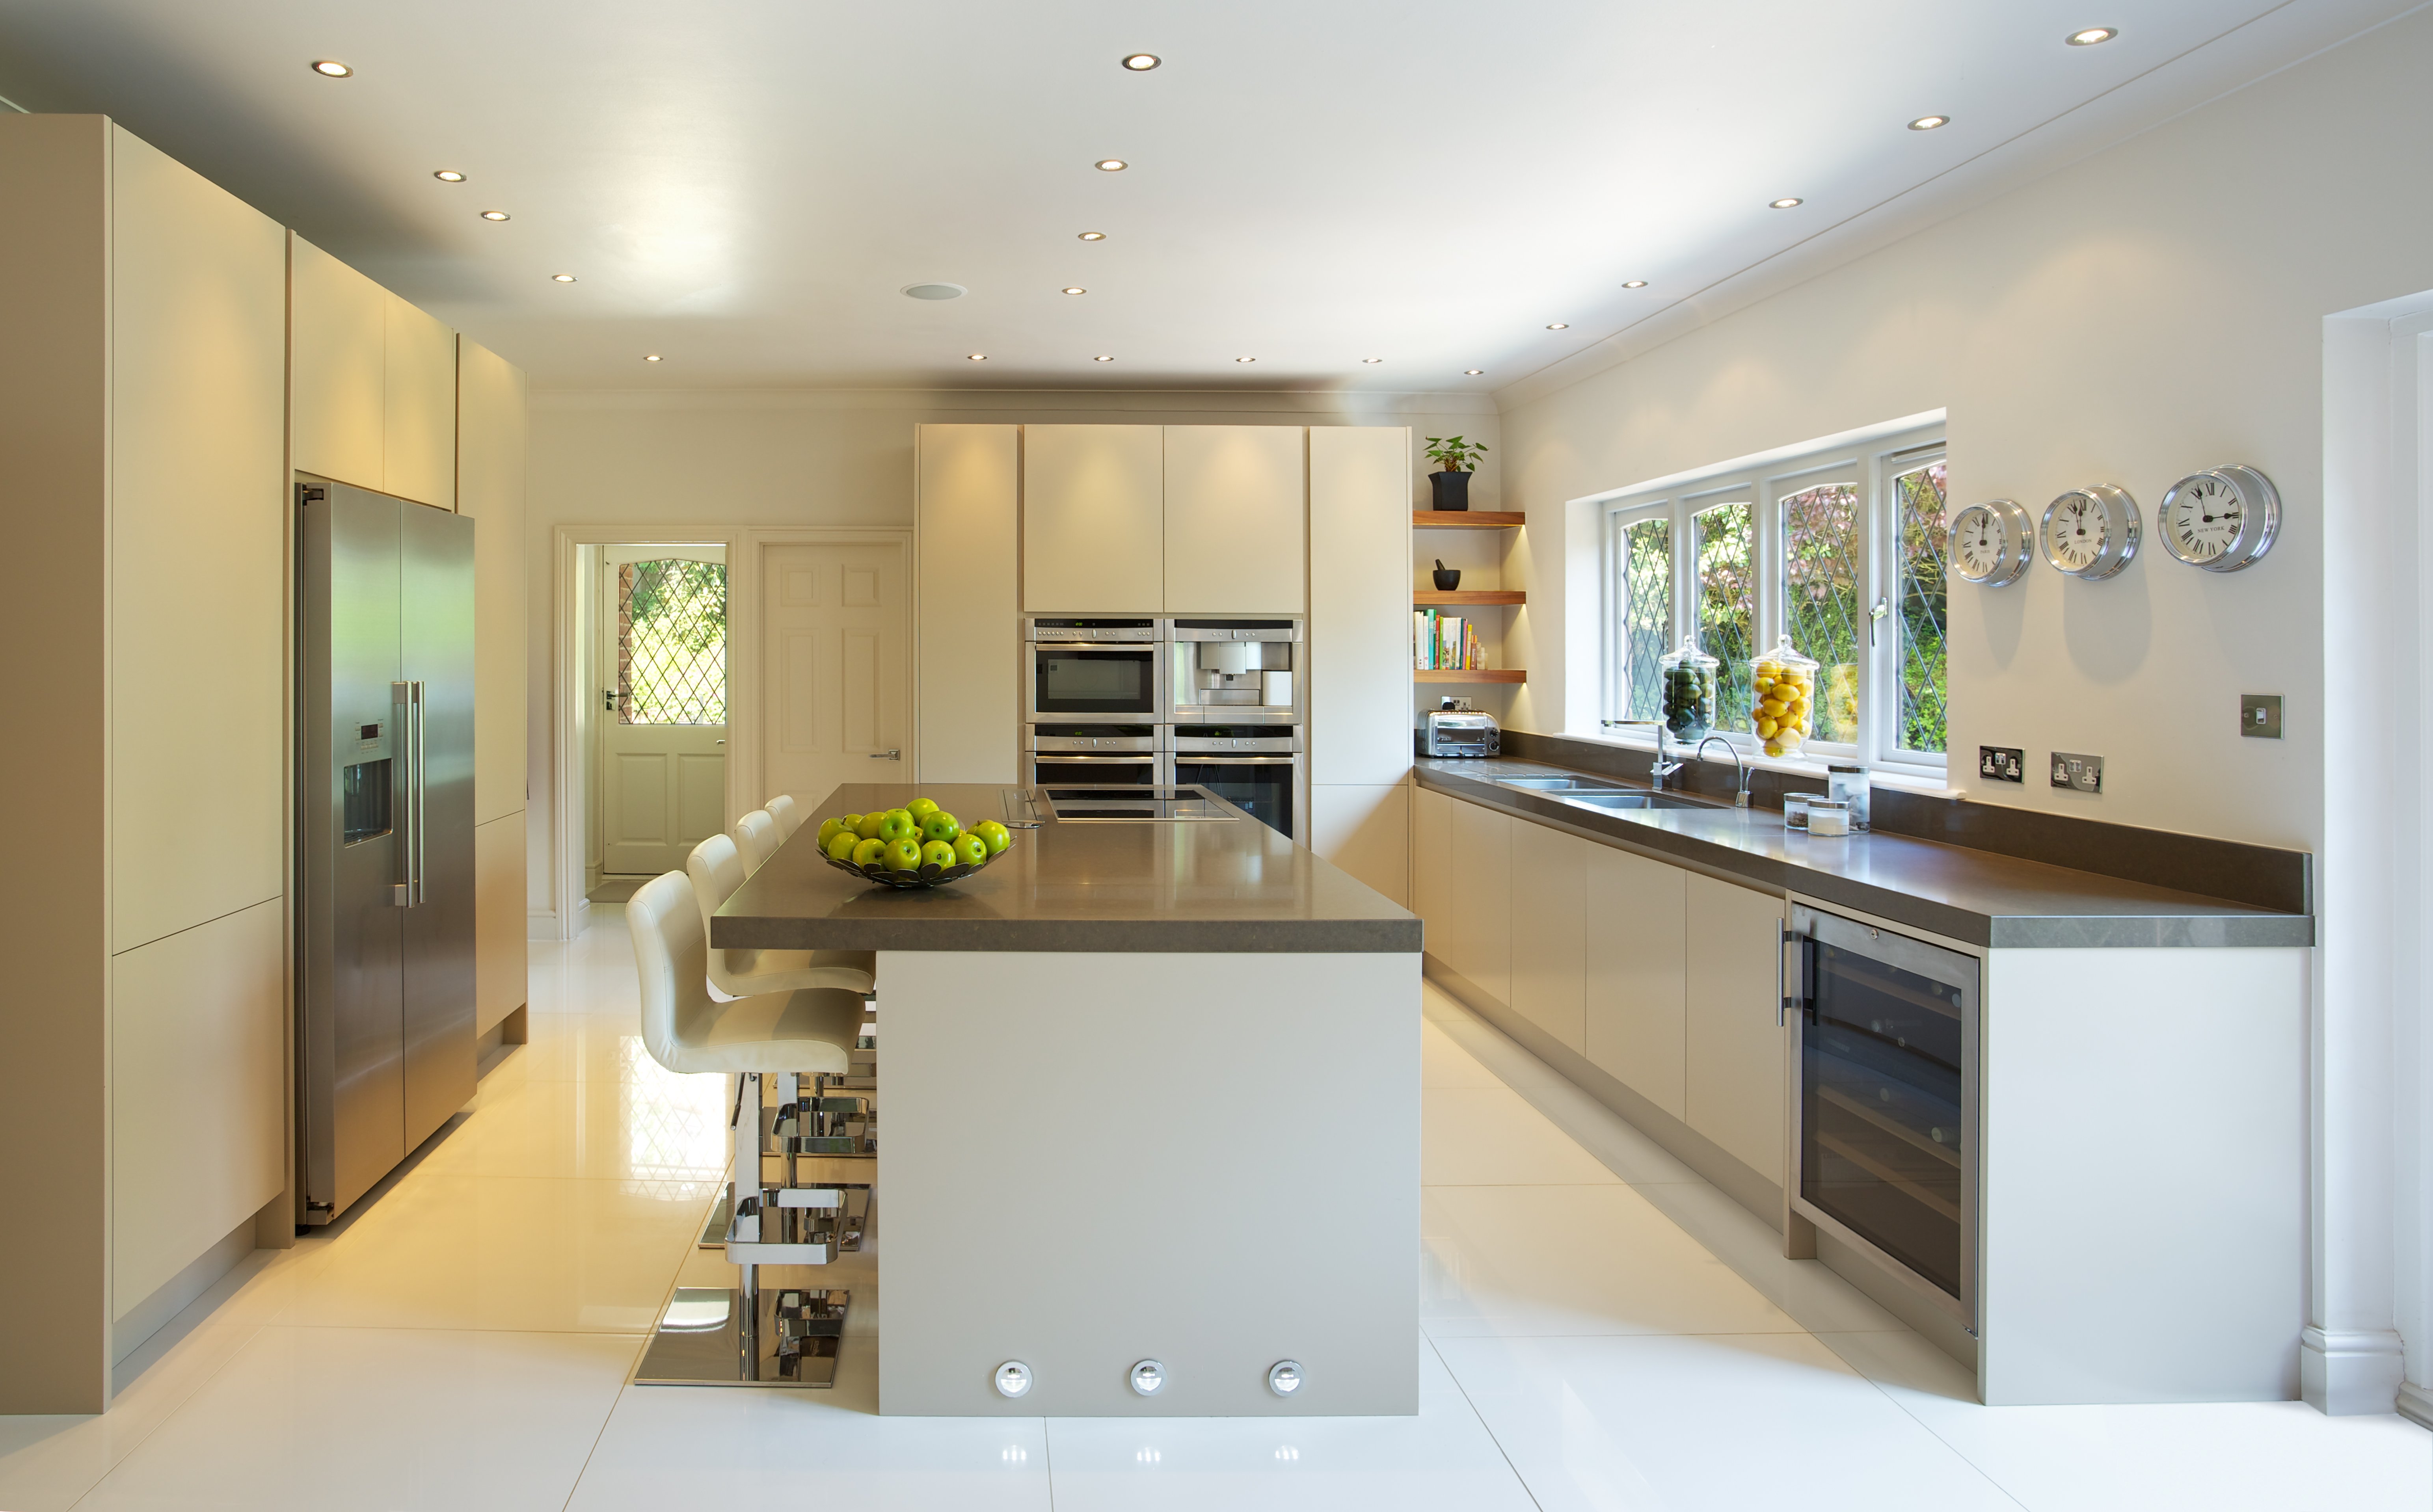 Choosing the Best Kitchen Color Schemes for Your Home - Start with neutrals